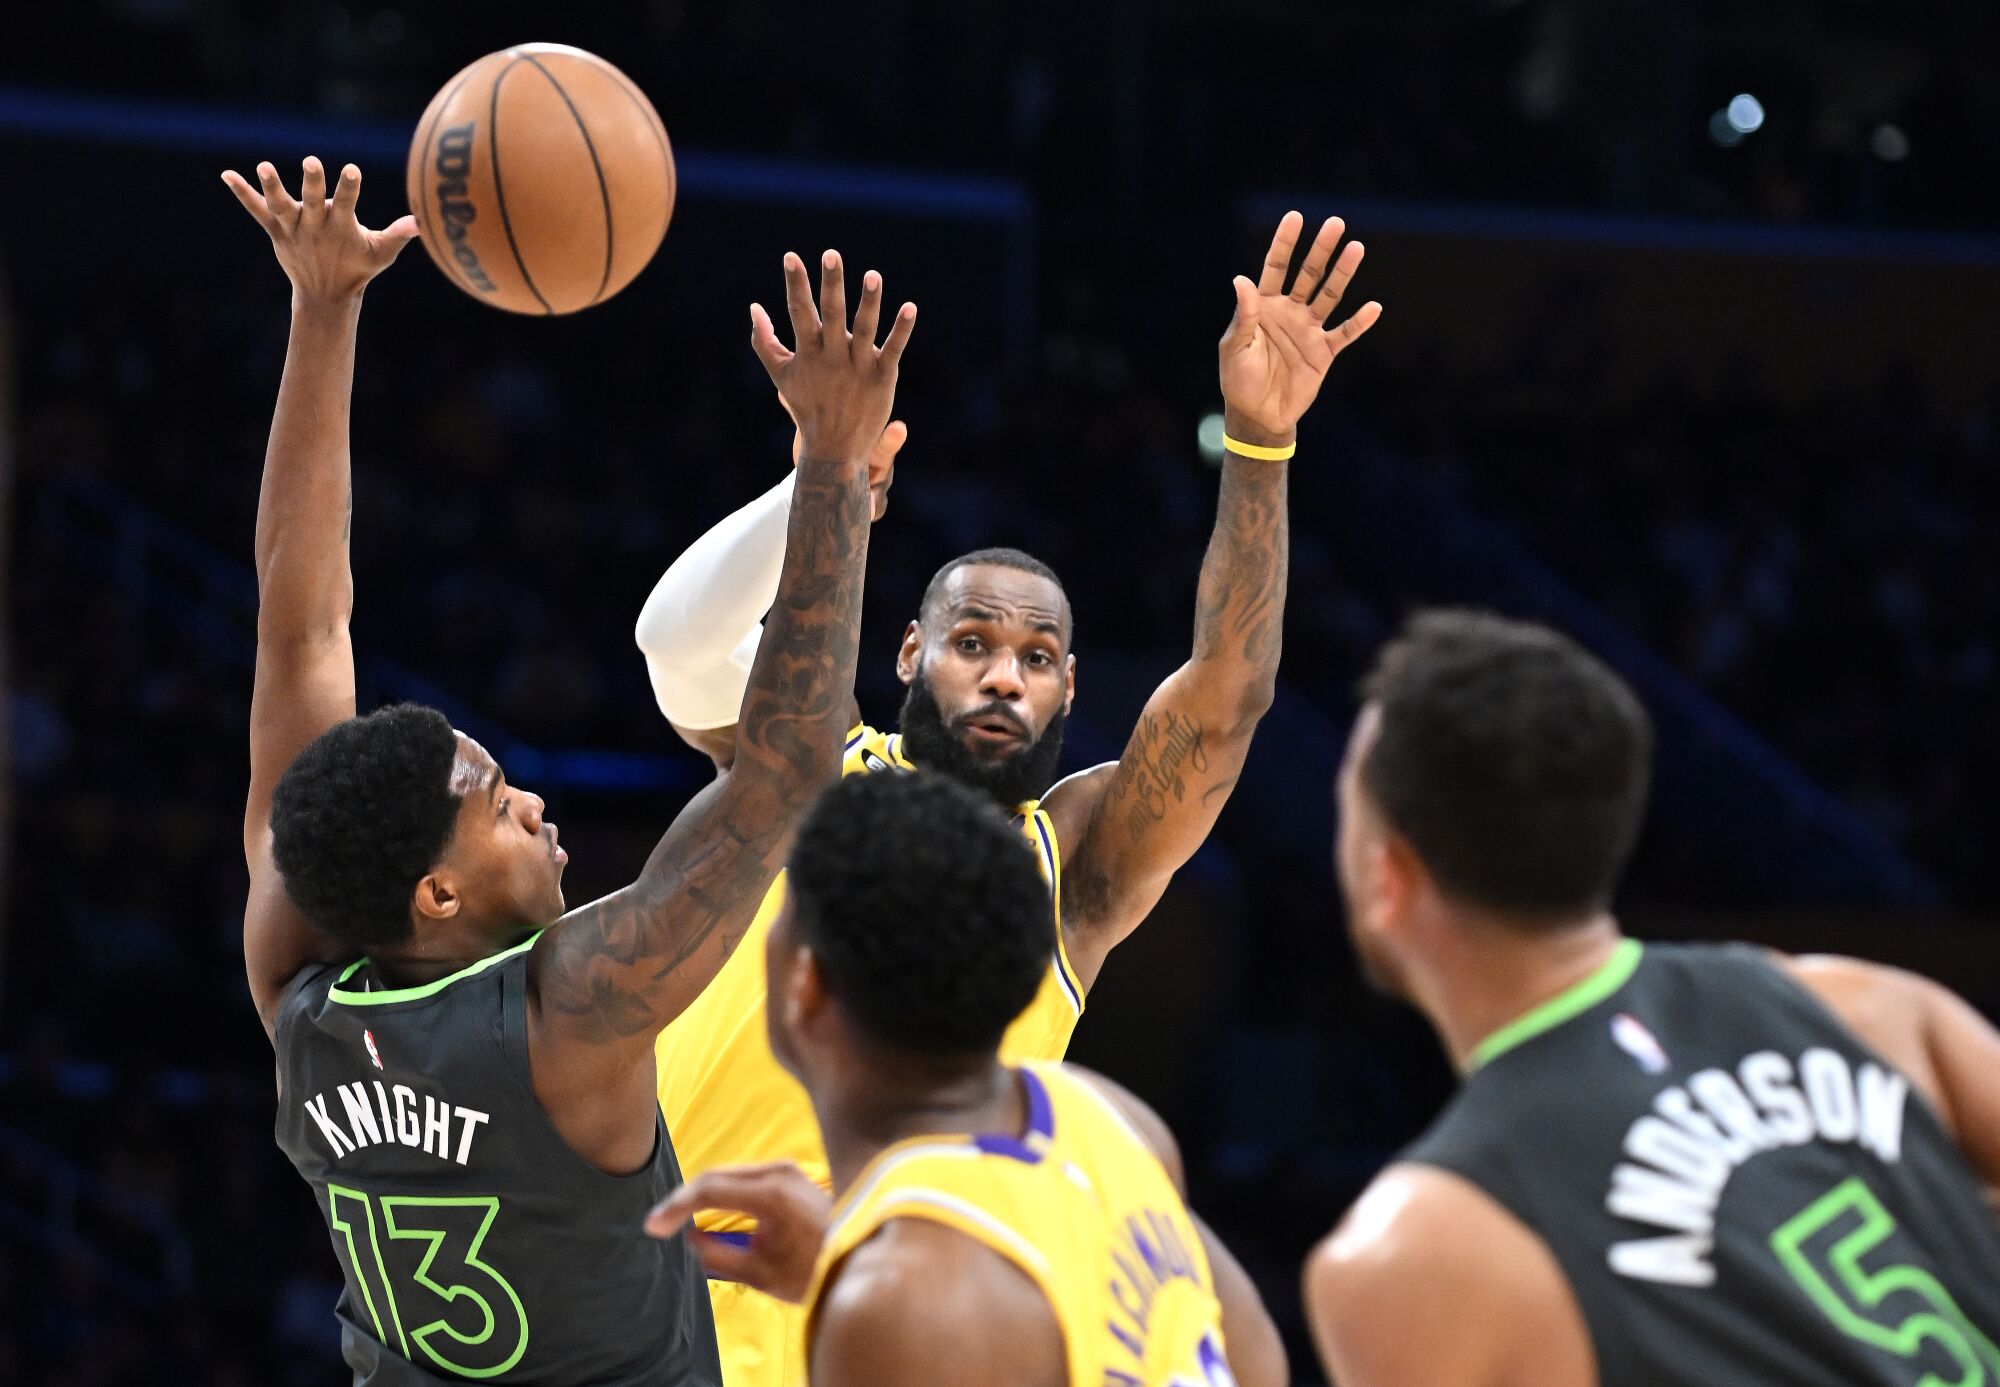 Lakers forward LeBron James passes the ball over a defender to a teammate cutting to the basket.